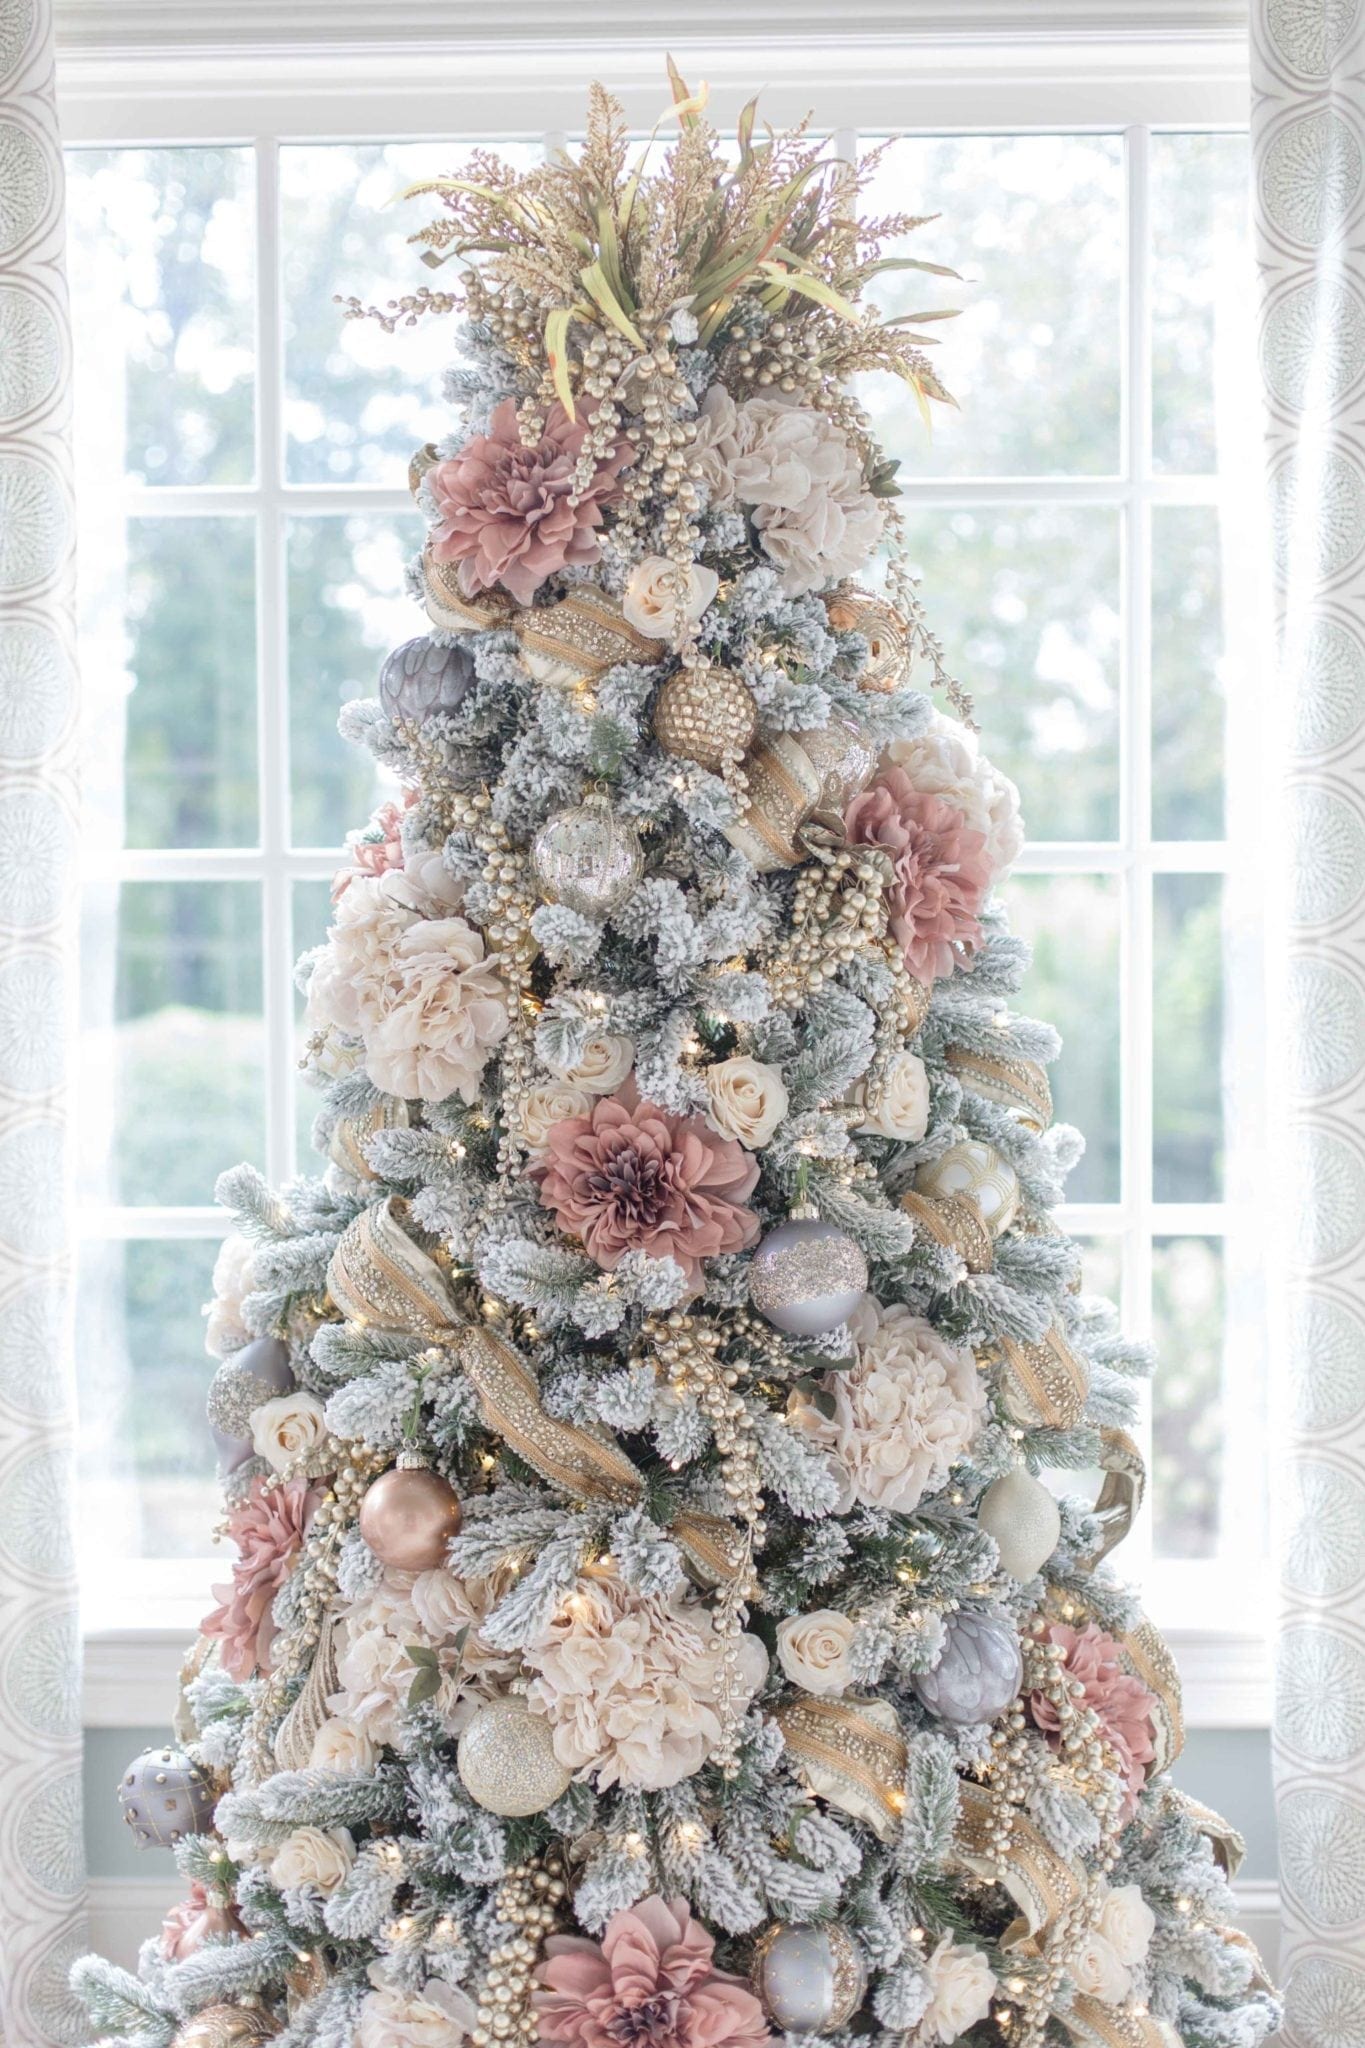 How to decorate a Christmas tree in pink and white and gold.